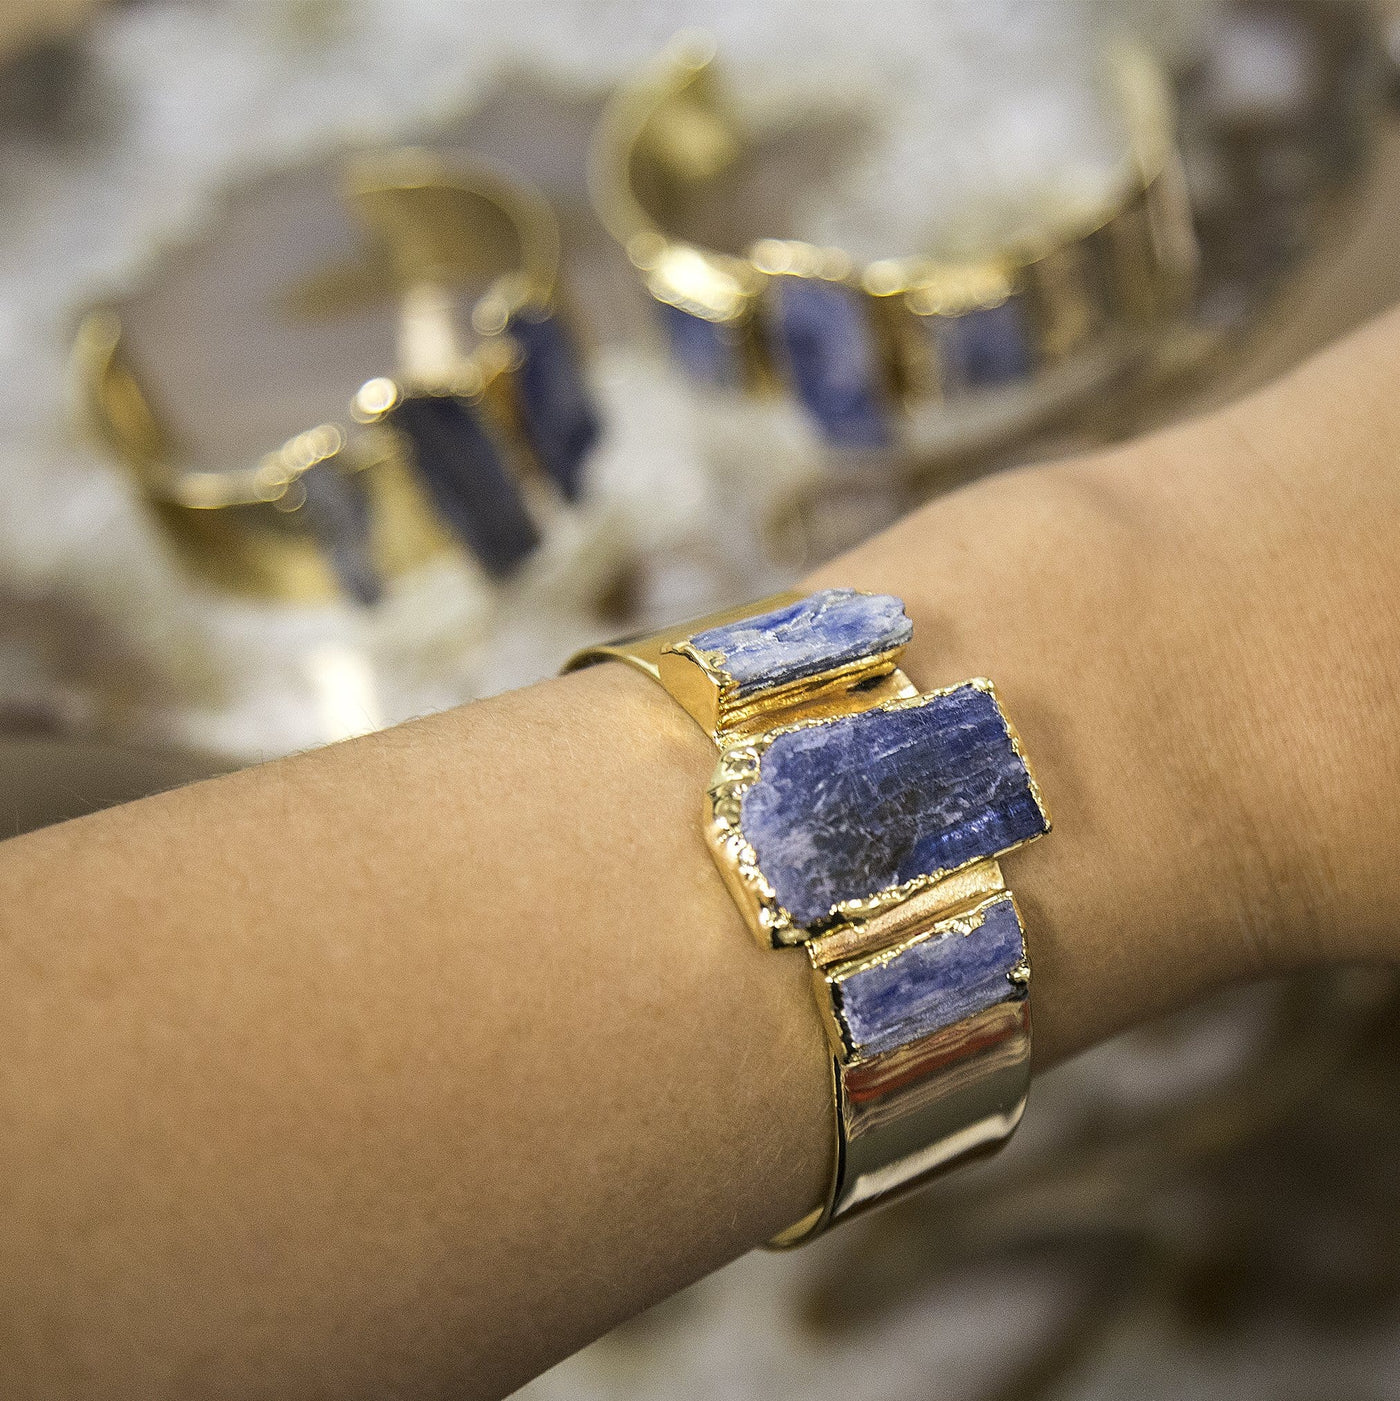 Blue Kyanite Three Stone Bracelet 24k Gold Electroplated on wrist for size and design reference